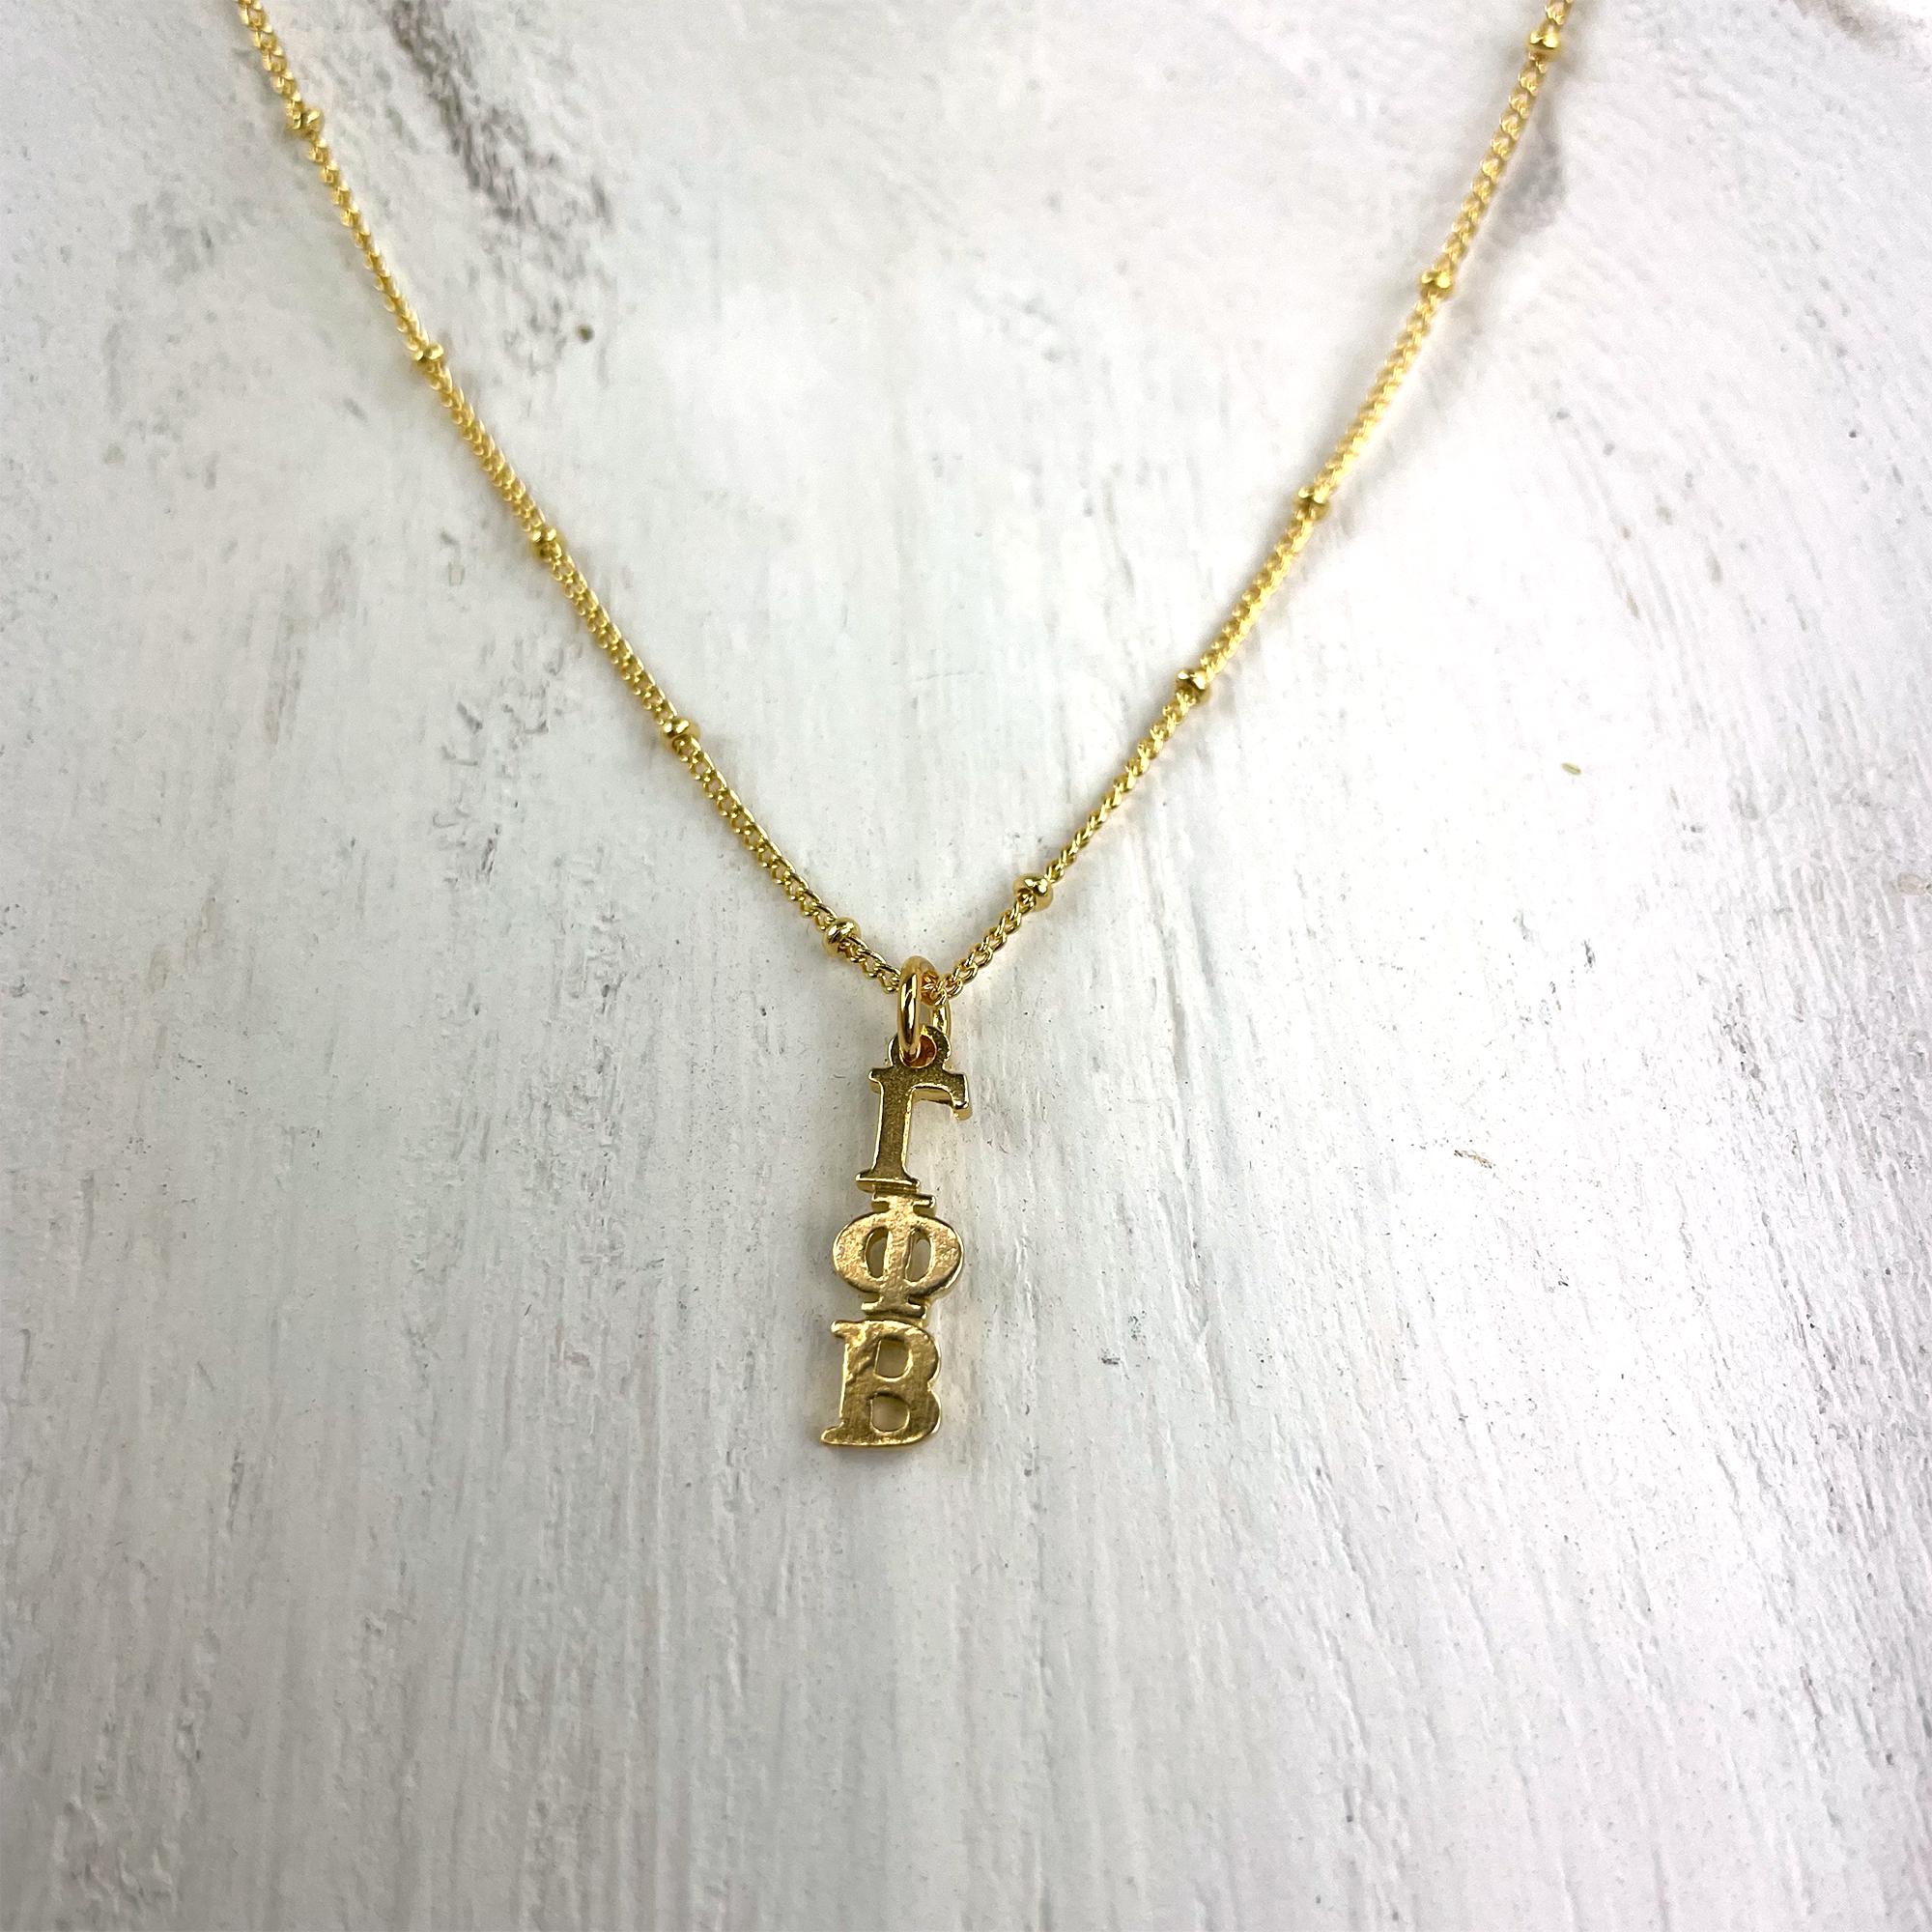 Gamma Phi Beta Lavaliere Gold Necklace - Go Greek Chic